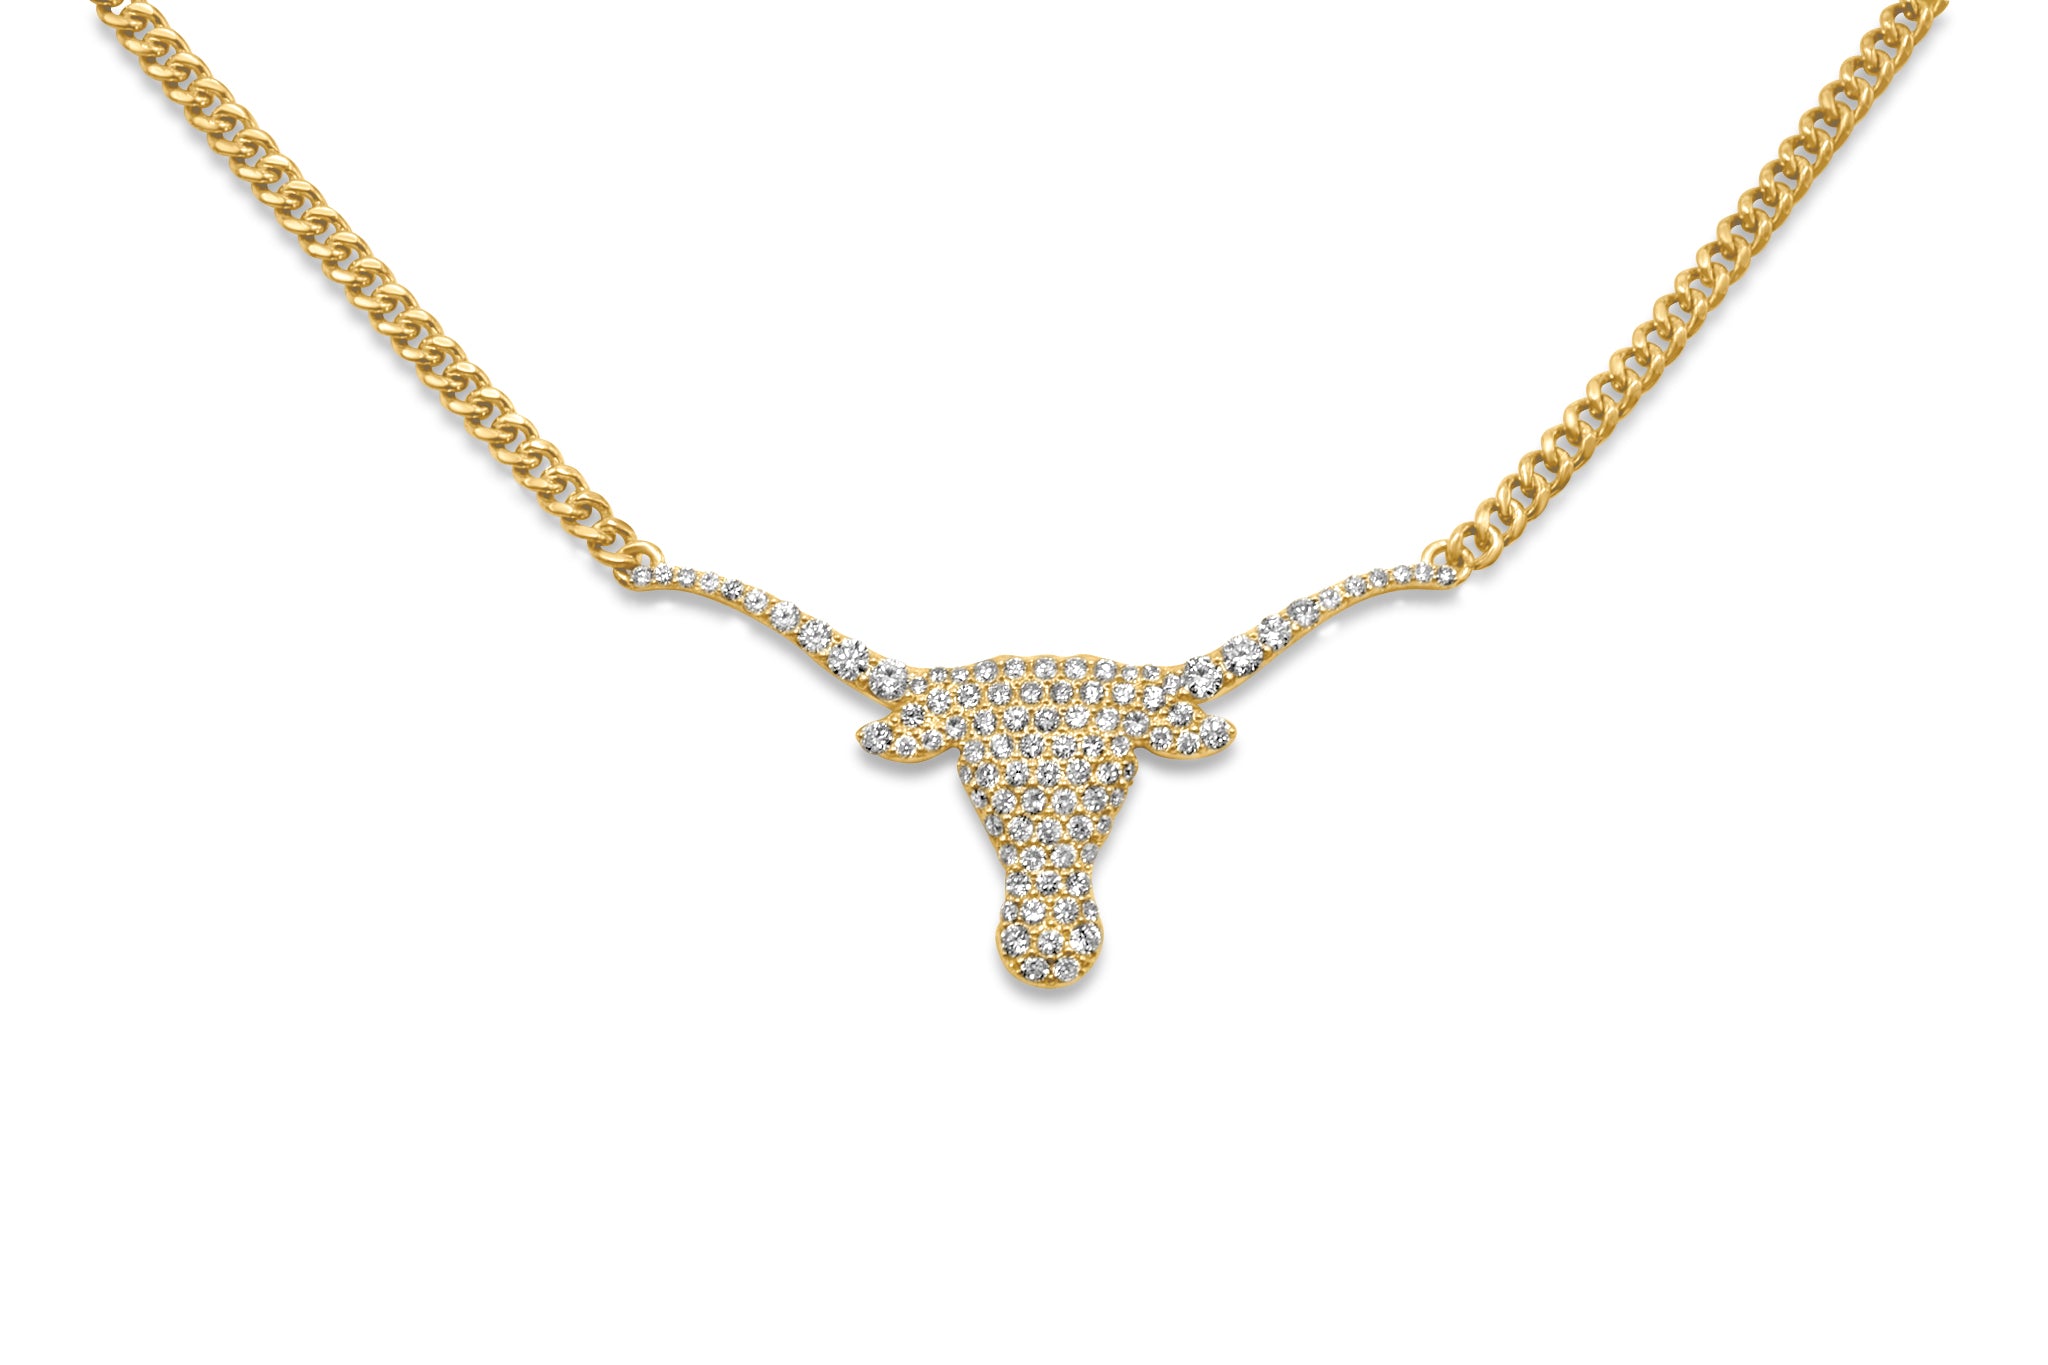 Pave Longhorn 14k Yellow Gold Charm in White Diamond